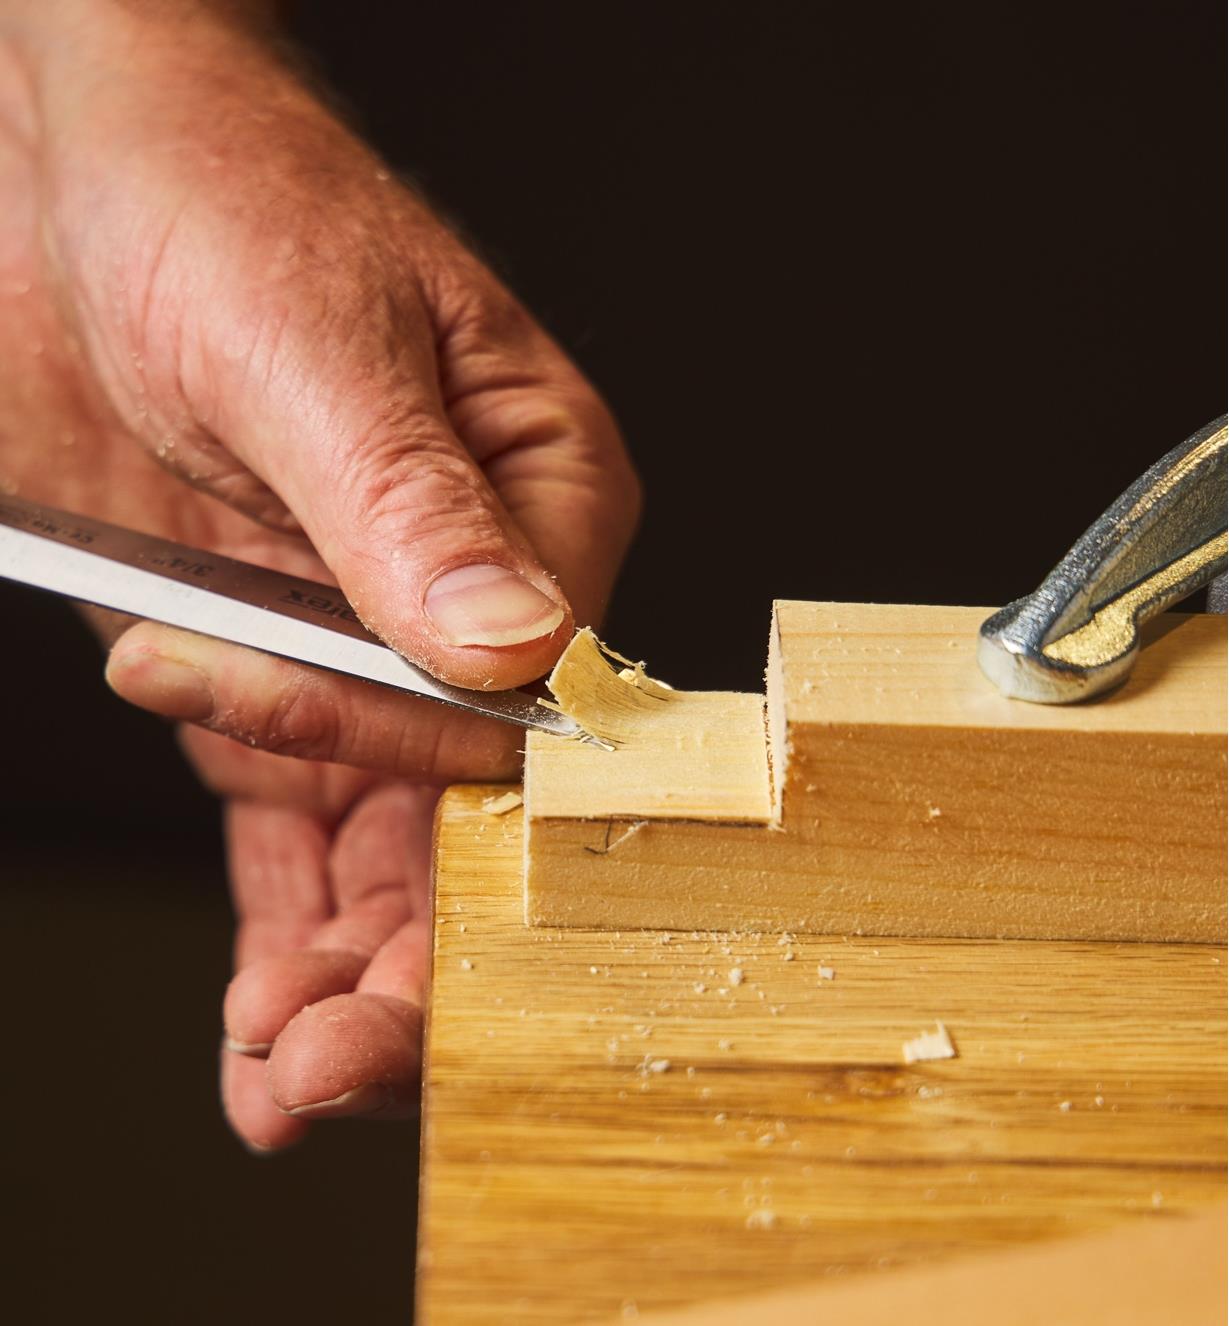 Chiselling out the waste on a tenon